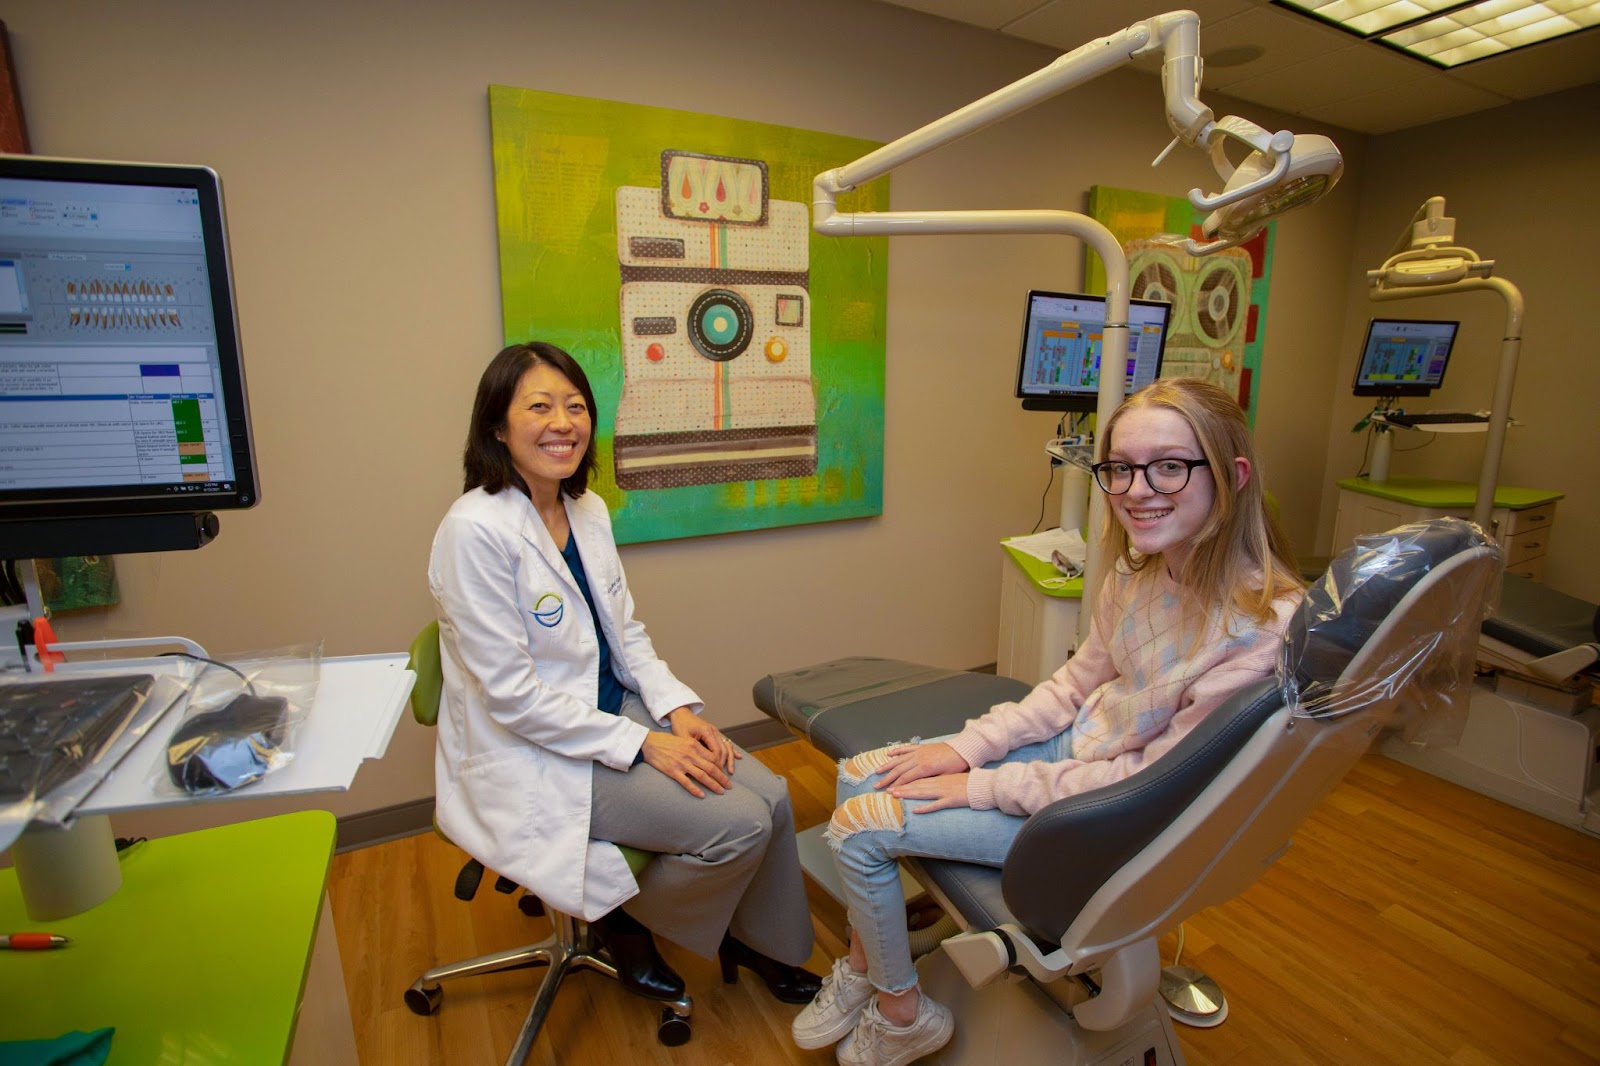 Dr. Sohn explains the importance of finishing the process to help maintain your beautiful smile and why retainers are important after braces.